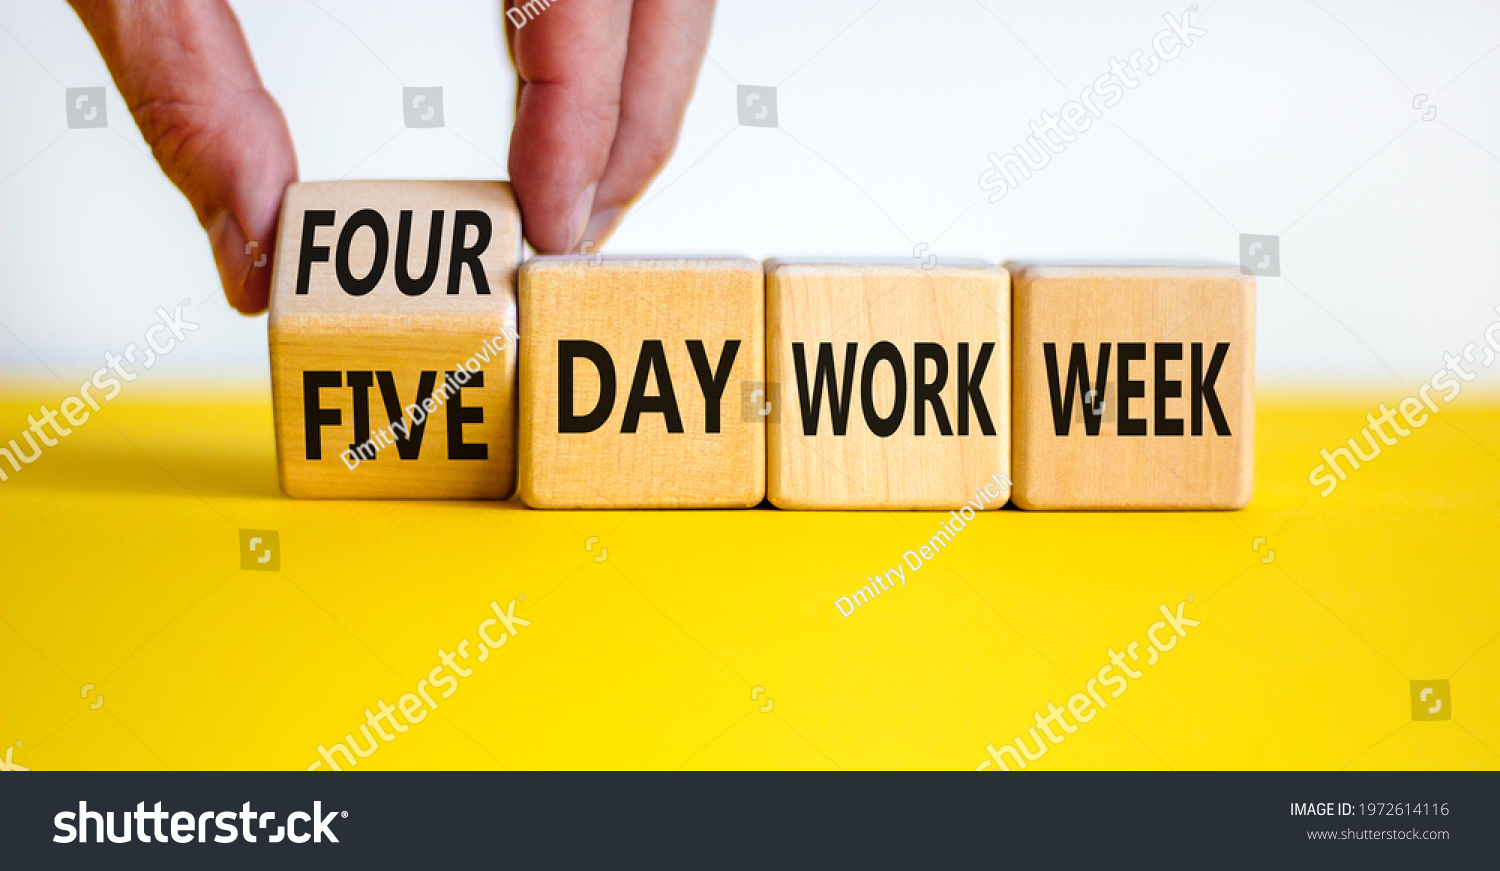 4 or 5 day work week symbol. Businessman turns the cube, changes words 'five day work week' to 'four day work week'. Beautiful white background. Copy space. Business and 4 or 5 day work week concept. #1972614116